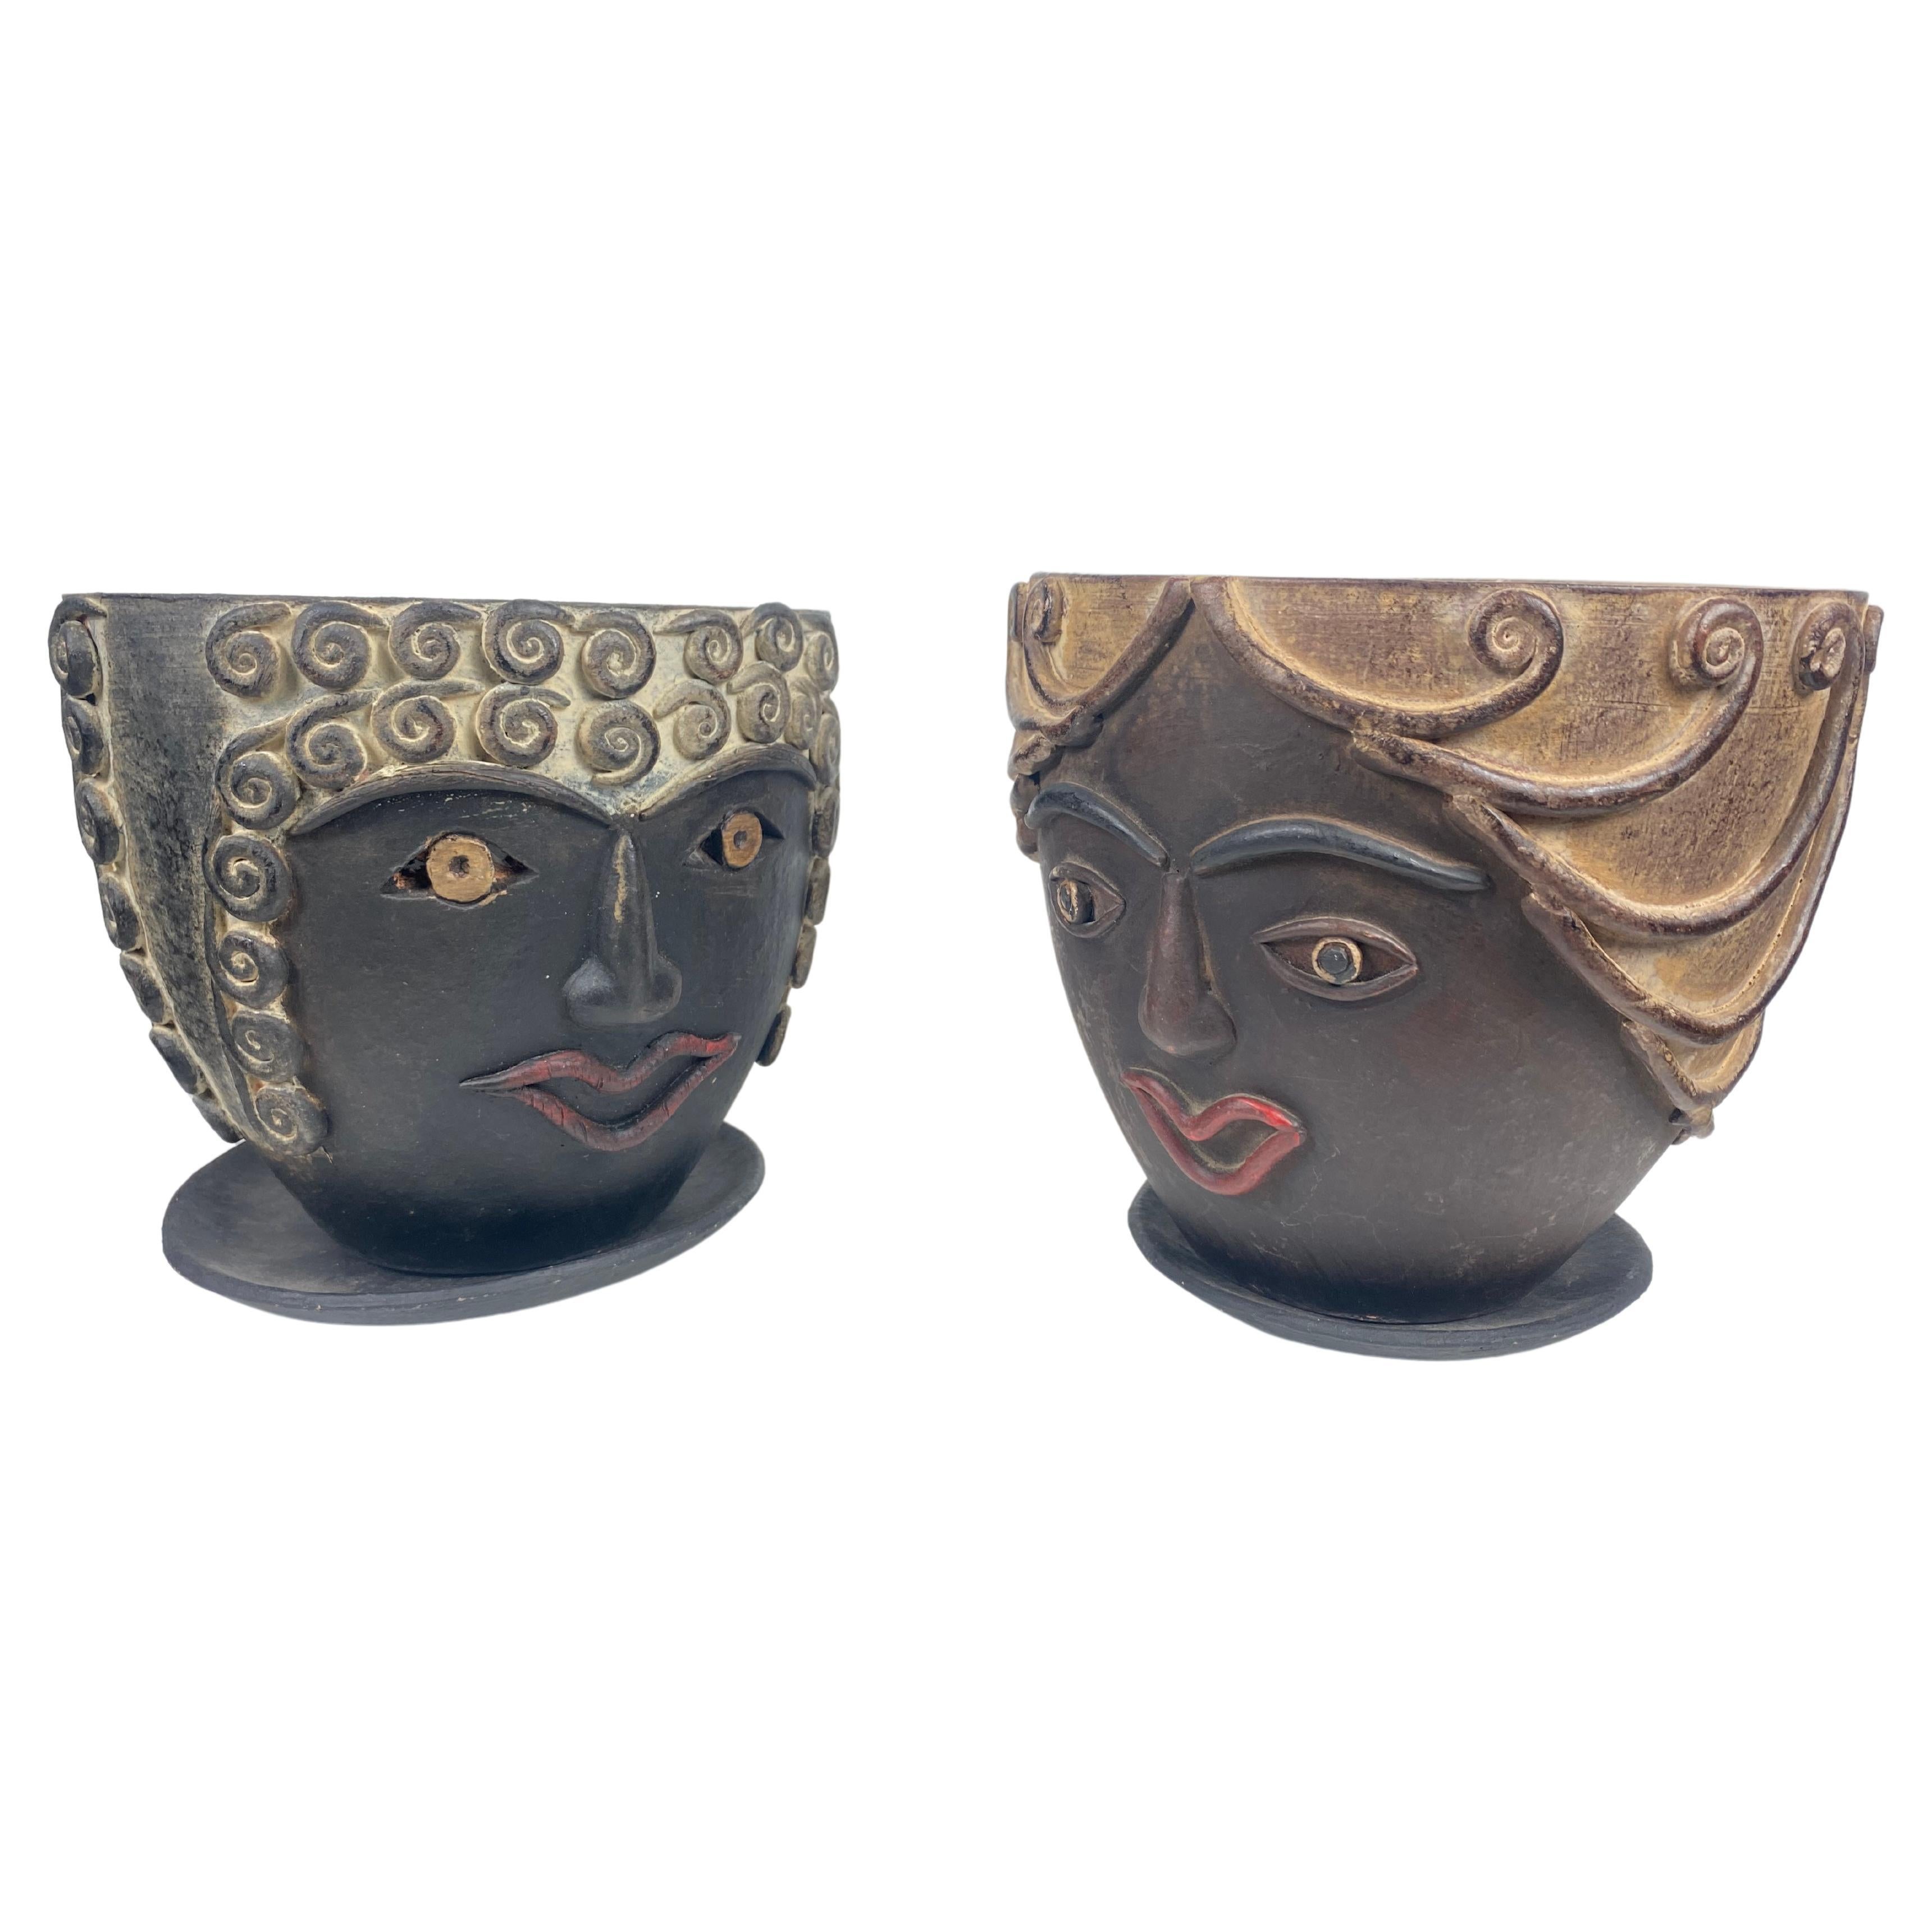 Pair of whimsical art Head Face's Terracotta Planters, 1960s Mexico For Sale